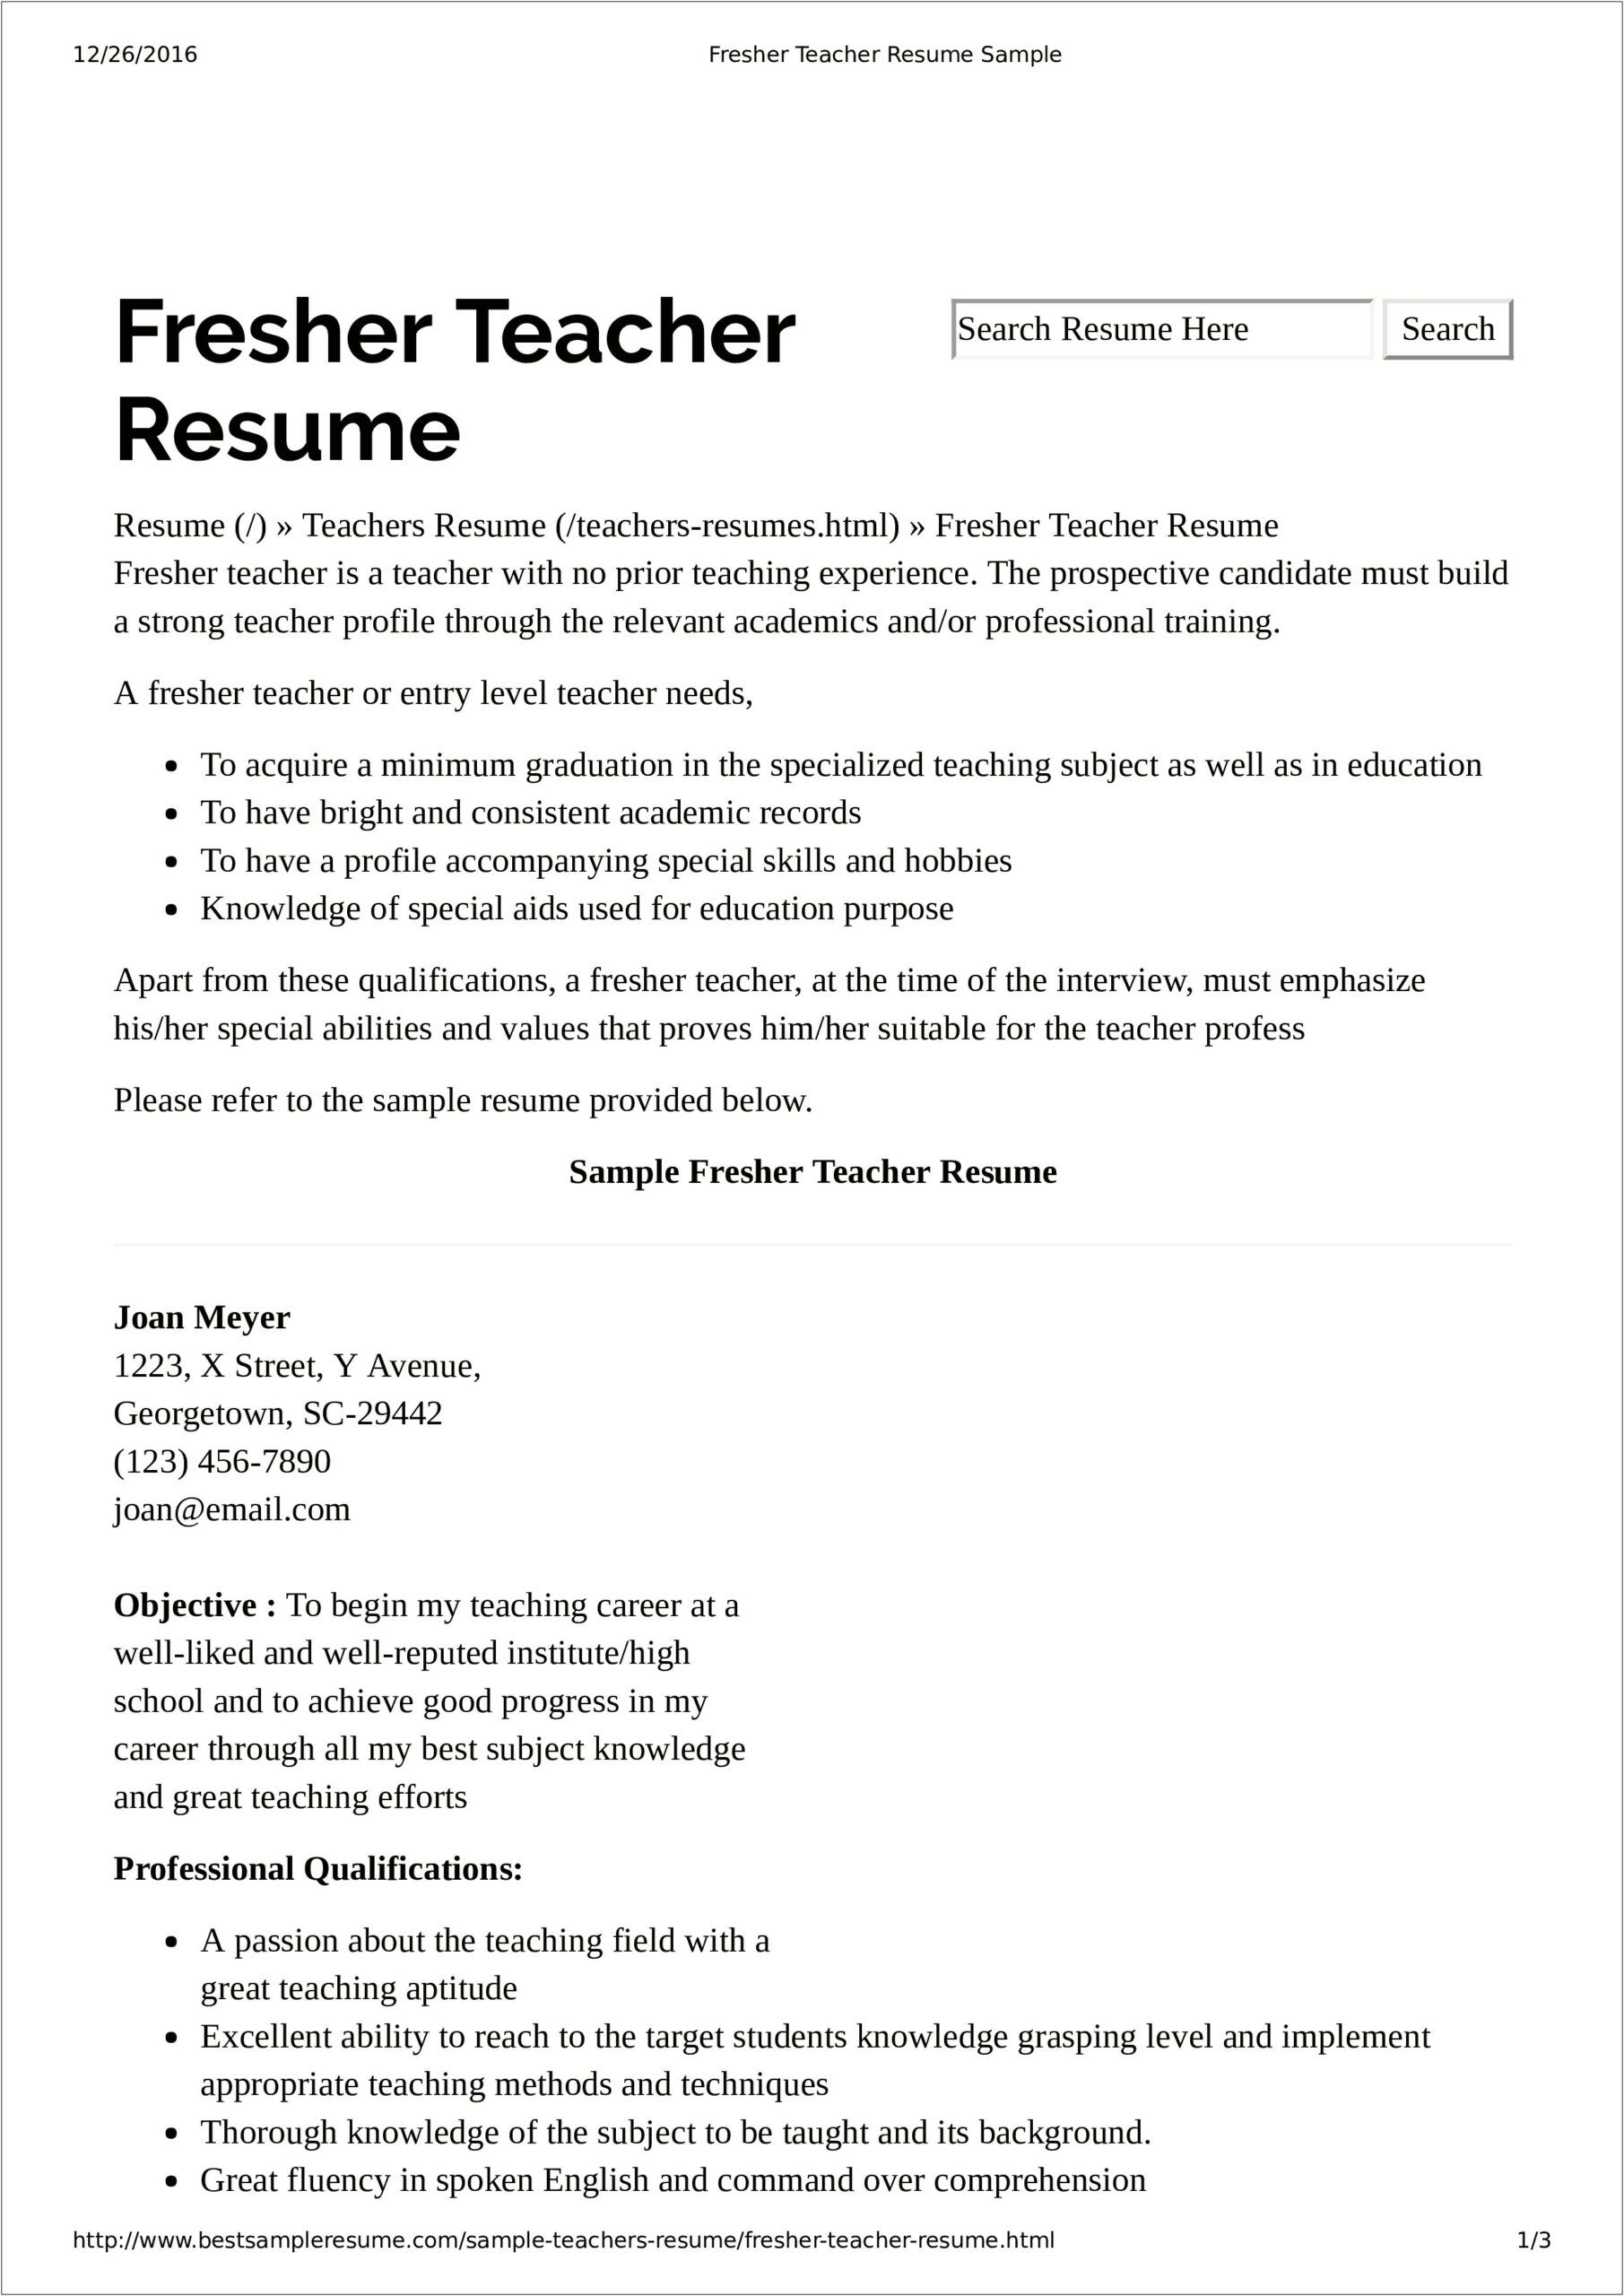 Special Education Teacher Resume Examples 2016